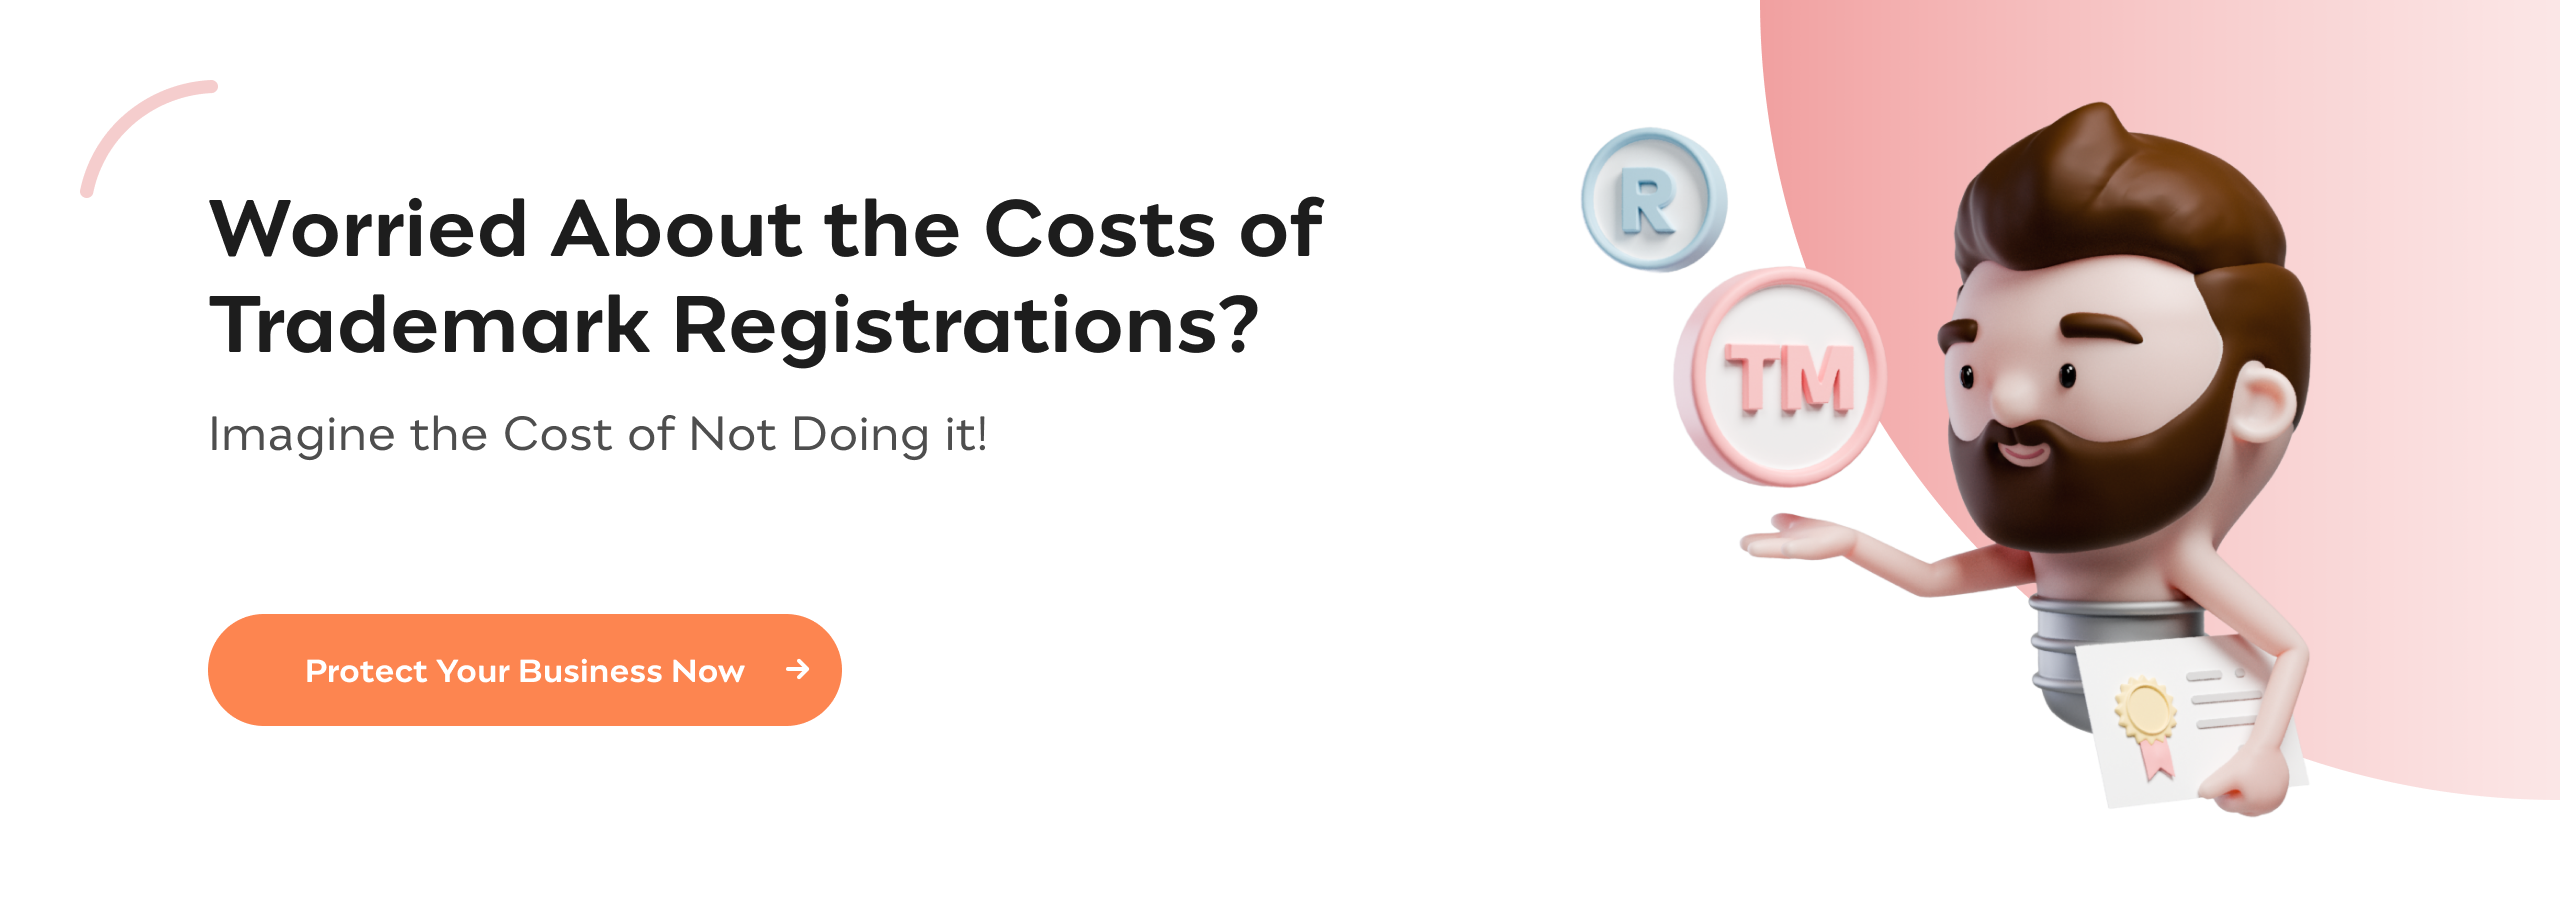 Worried About the Costs of Trademark Registrations? Imagine the Cost of Not Doing It!